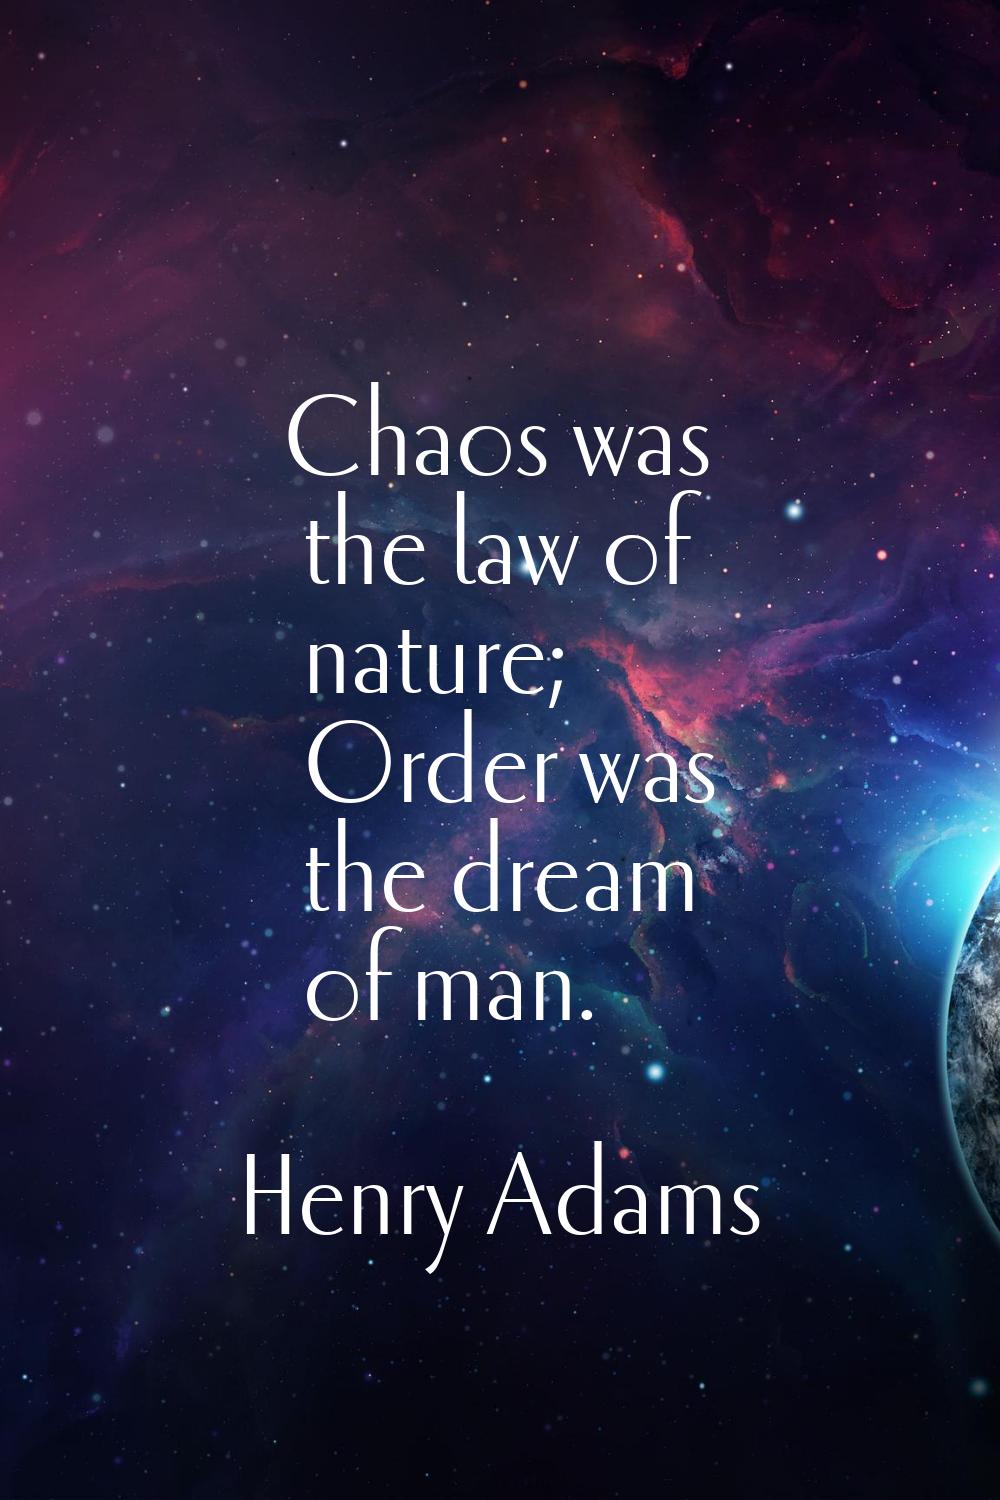 Chaos was the law of nature; Order was the dream of man.